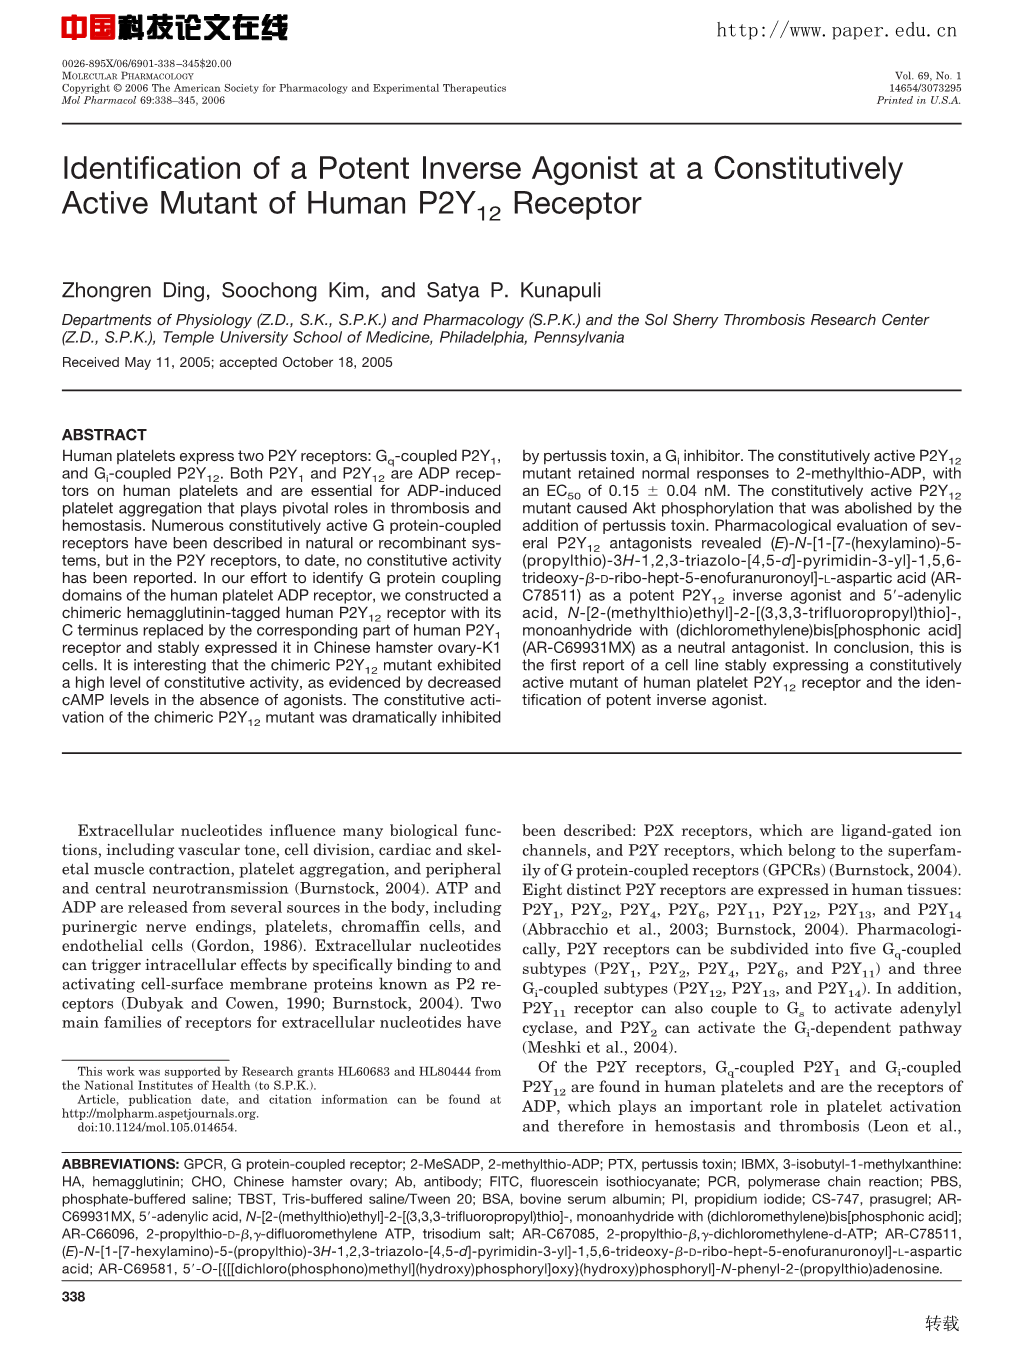 Identification of a Potent Inverse Agonist at a Constitutively Active Mutant of Human P2Y12 Receptor